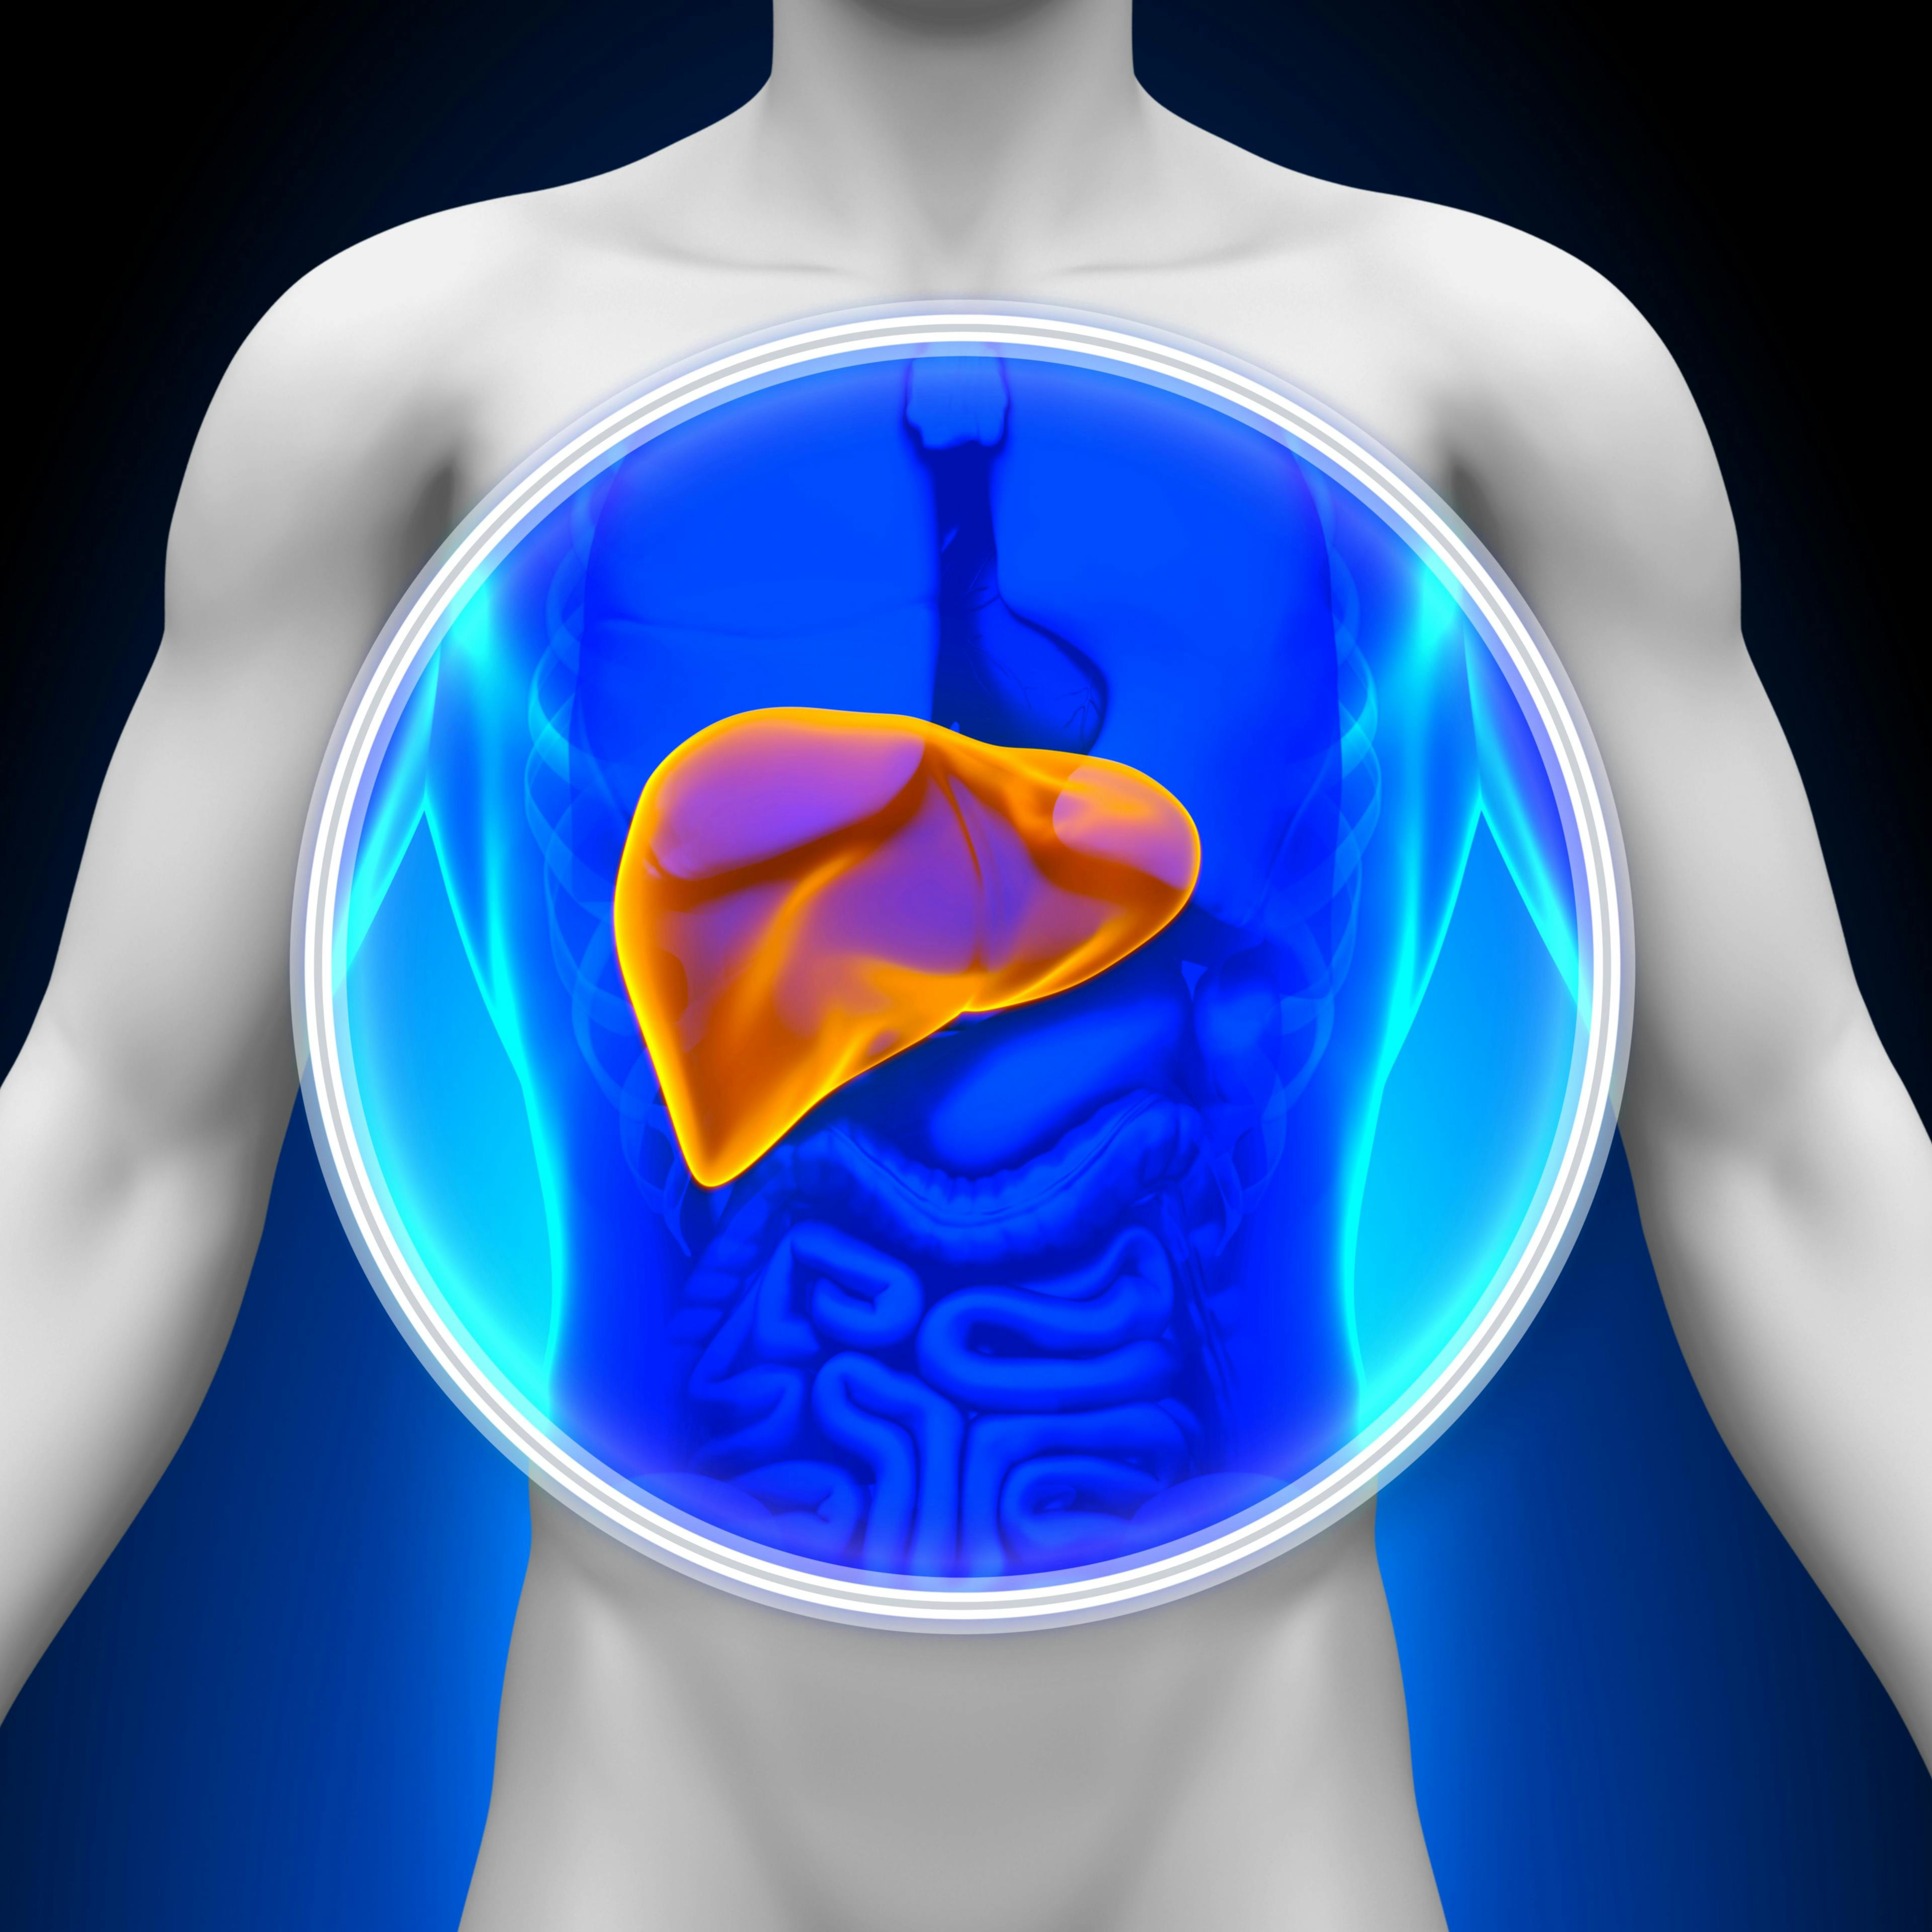 Patients with hepatocellular carcinoma and Child-Pugh-B liver function appear to have worse overall survival following treatment with regorafenib in the REFINE trial.